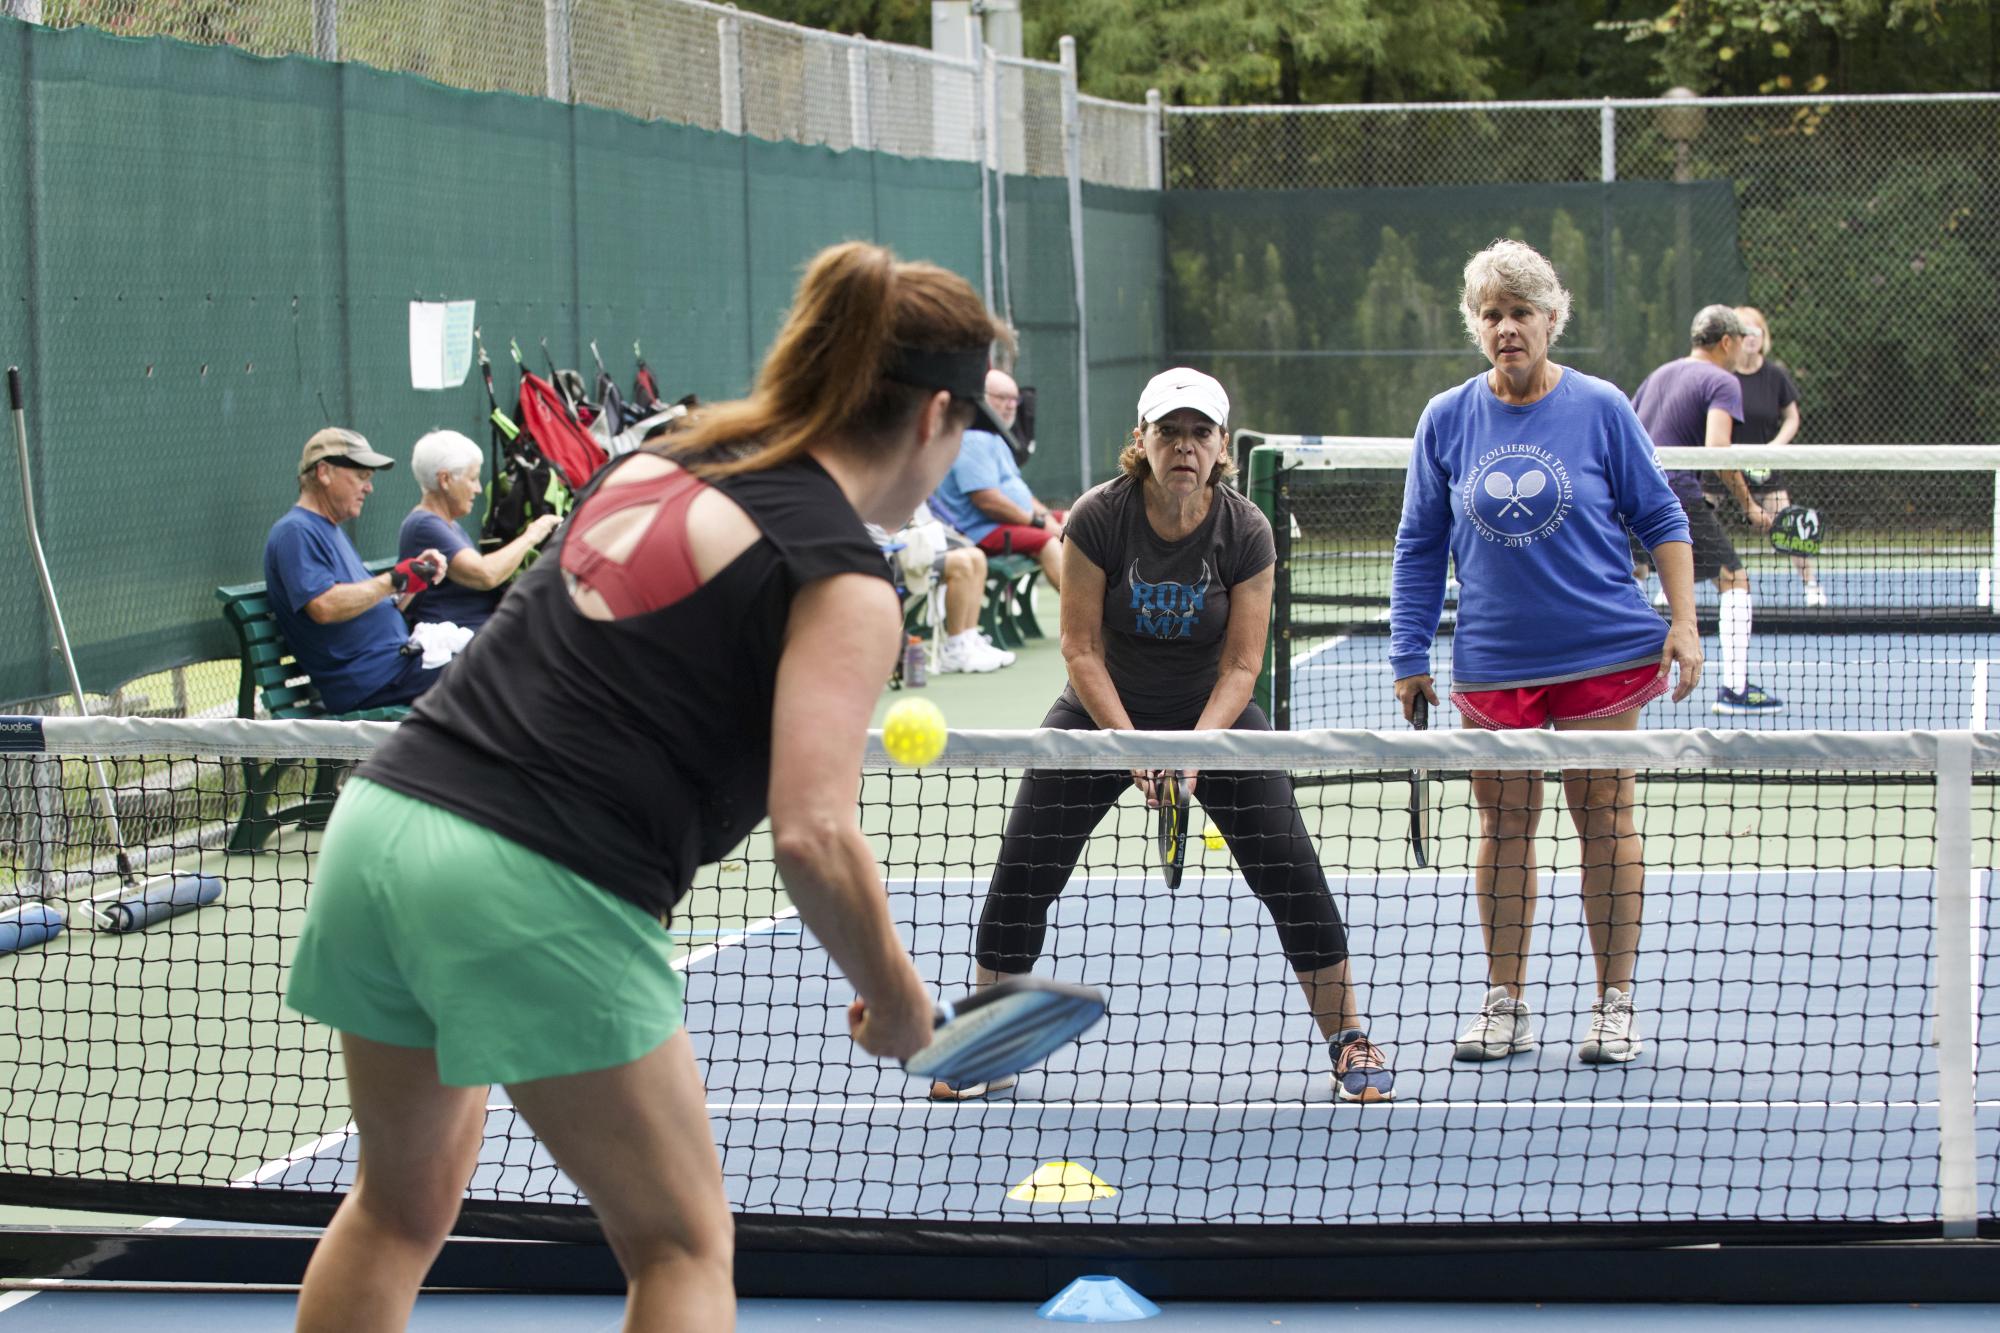 Pickleball players taking to courts across Tennessee Tennessee Town